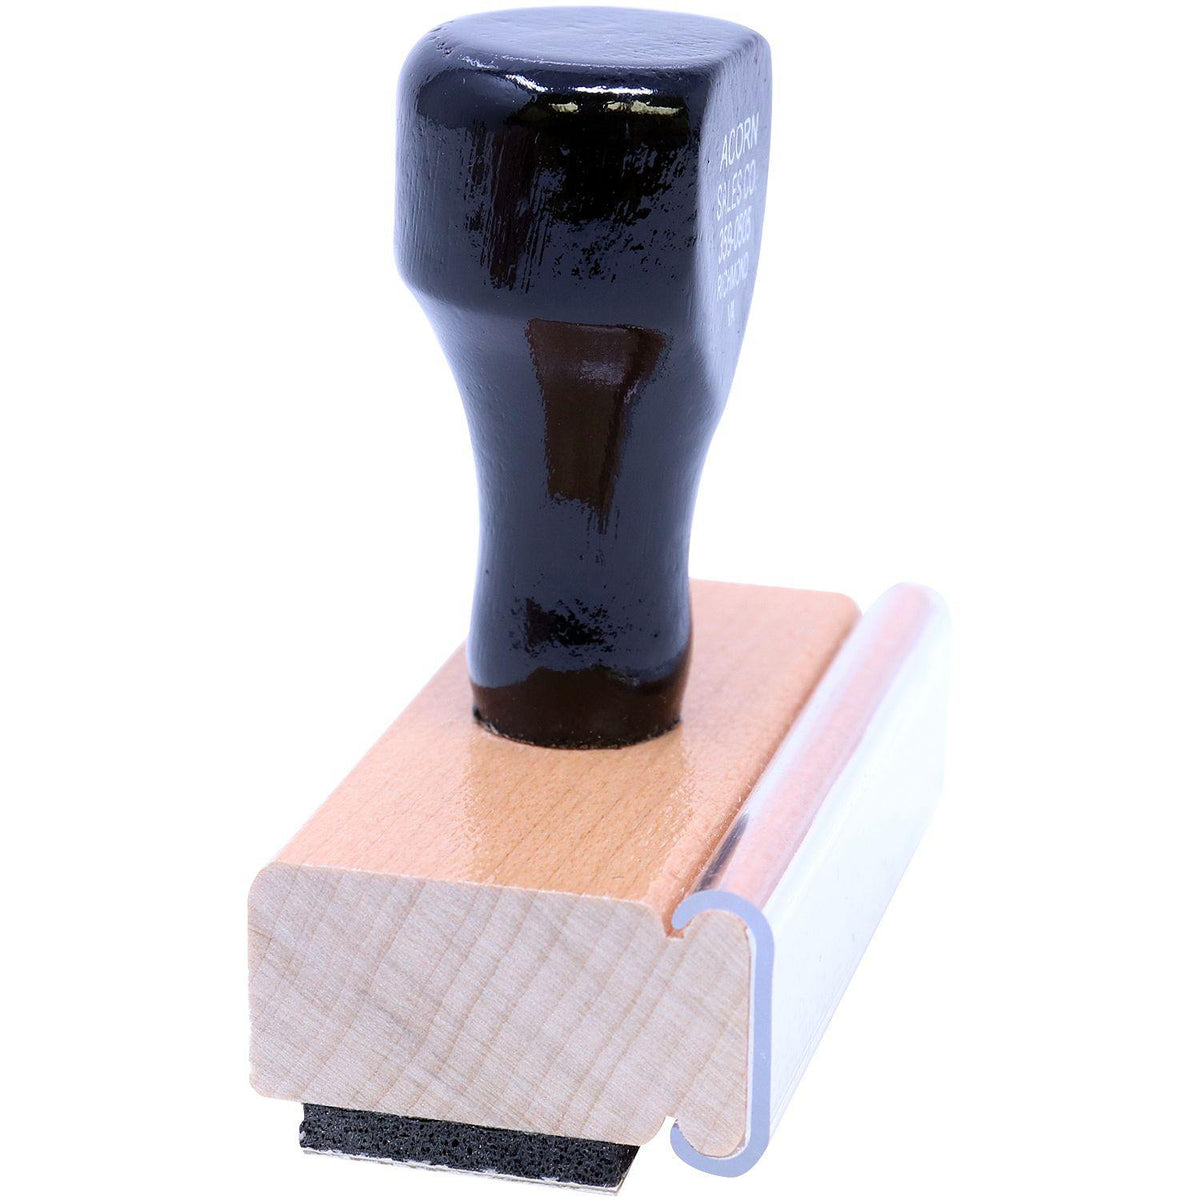 Rewrite In Cursive Rubber Stamp - Engineer Seal Stamps - Brand_Acorn, Impression Size_Small, Stamp Type_Regular Stamp, Type of Use_Teacher